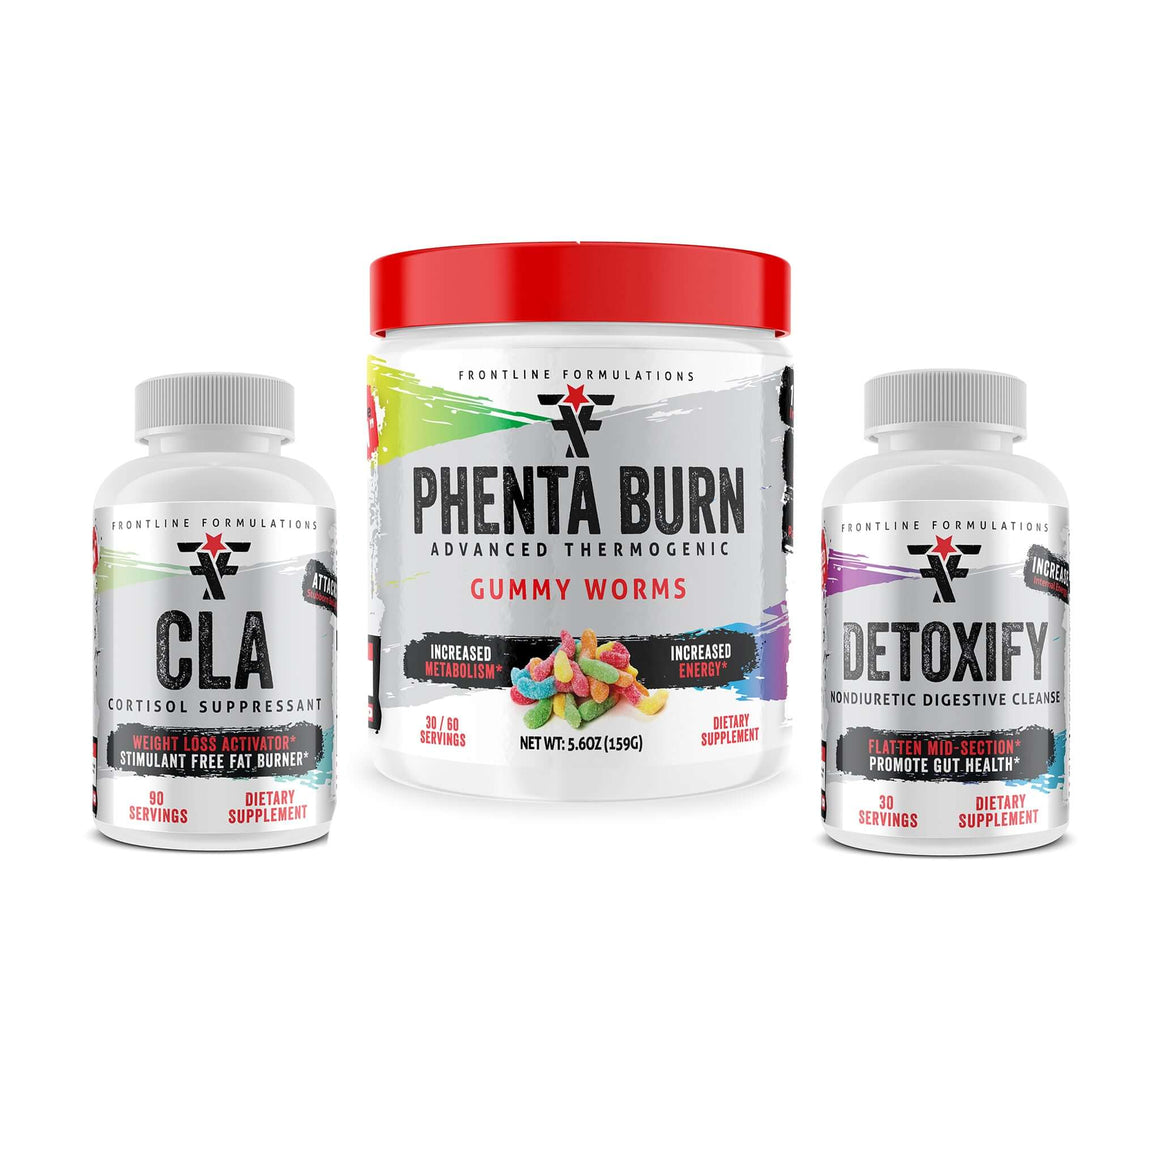 Frontline Formulations Women's Weight Loss Kit The fat burning essentials stack provides our best supplements for weight loss in one perfectly matched bundle. This stack is designed to increase your performance, lean muscle preservation, and fat metabolis